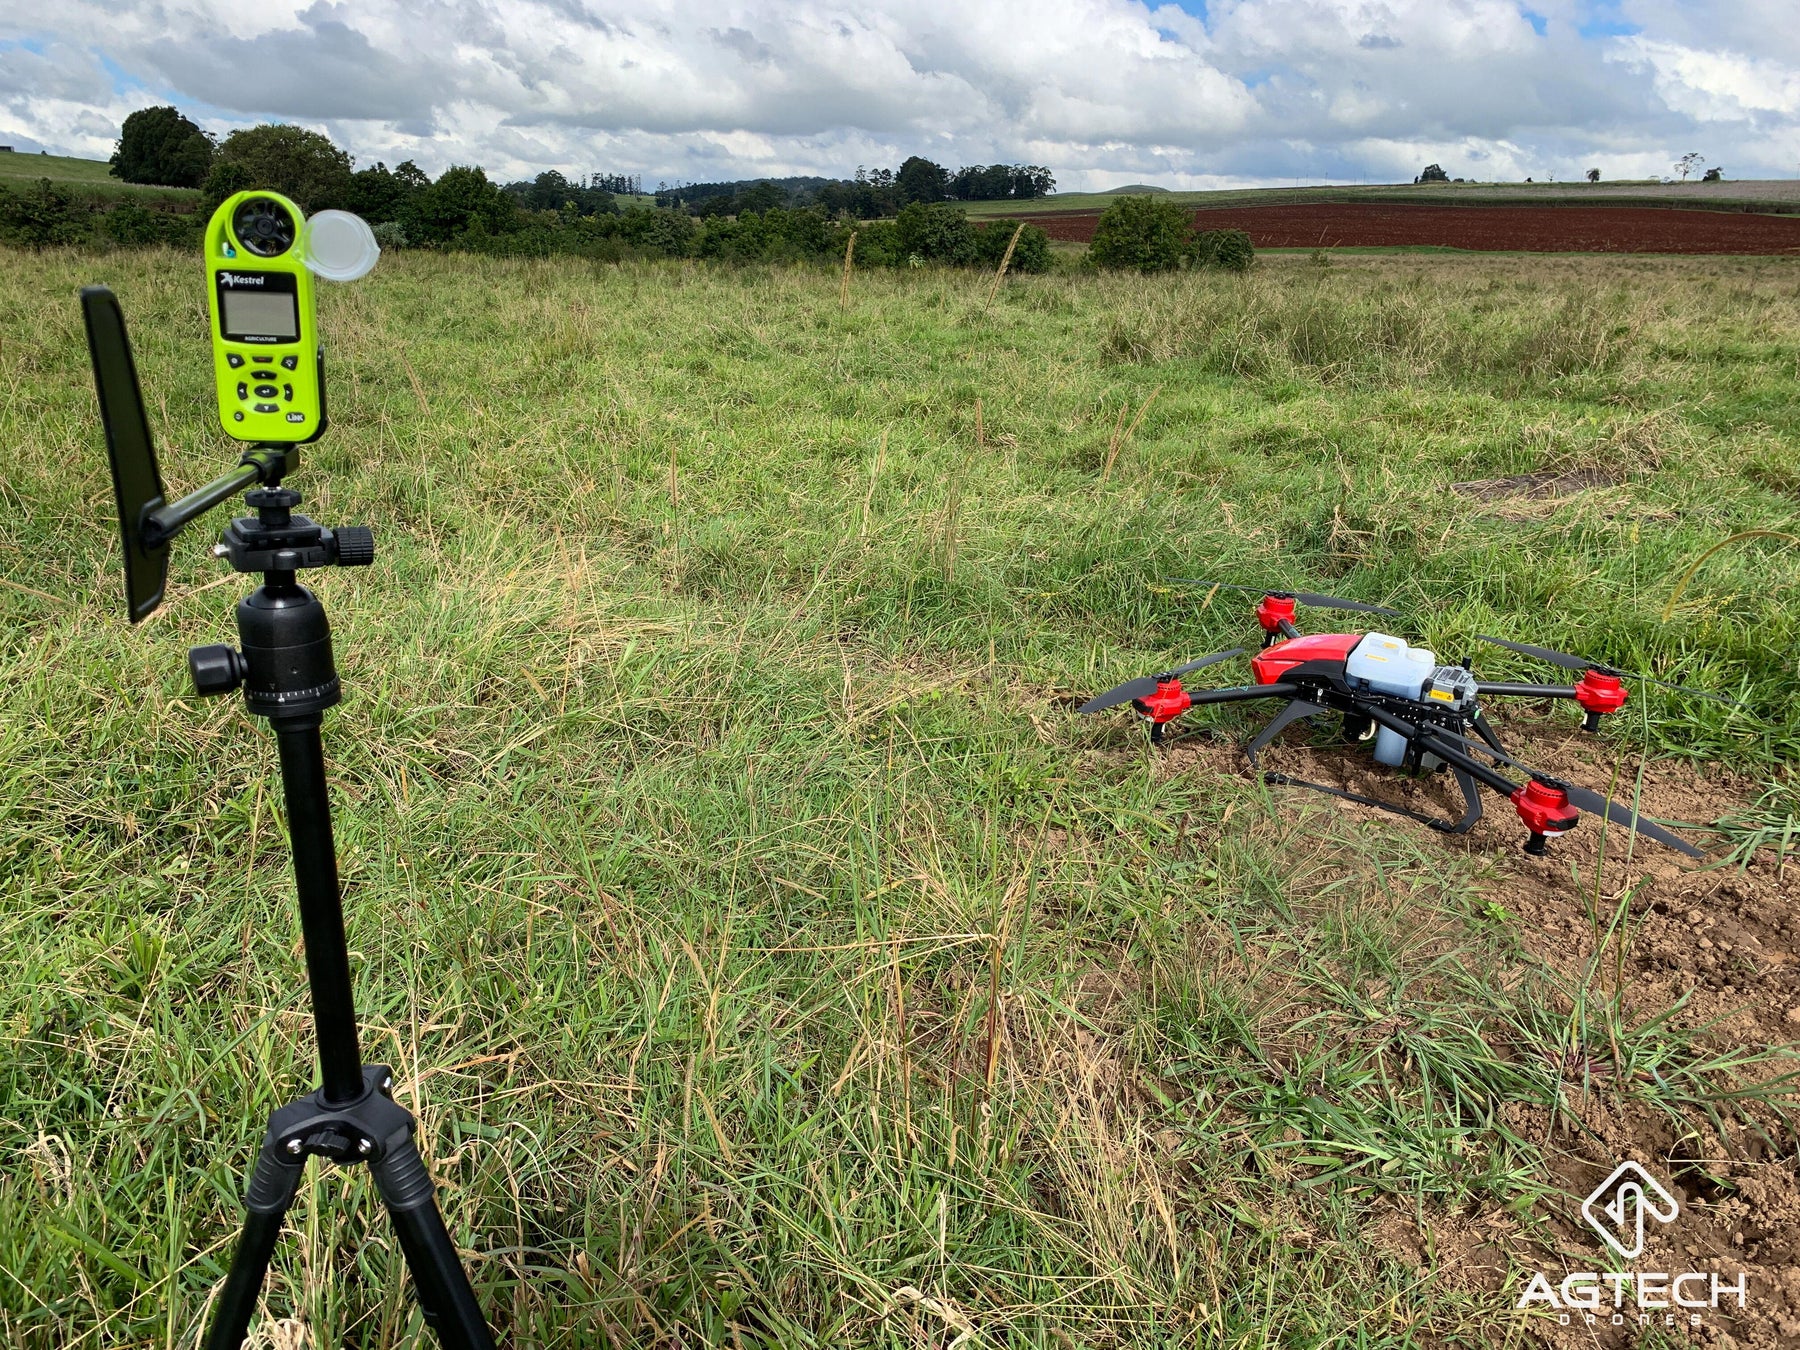 AgTech Drones and the Kestrel 5500AG